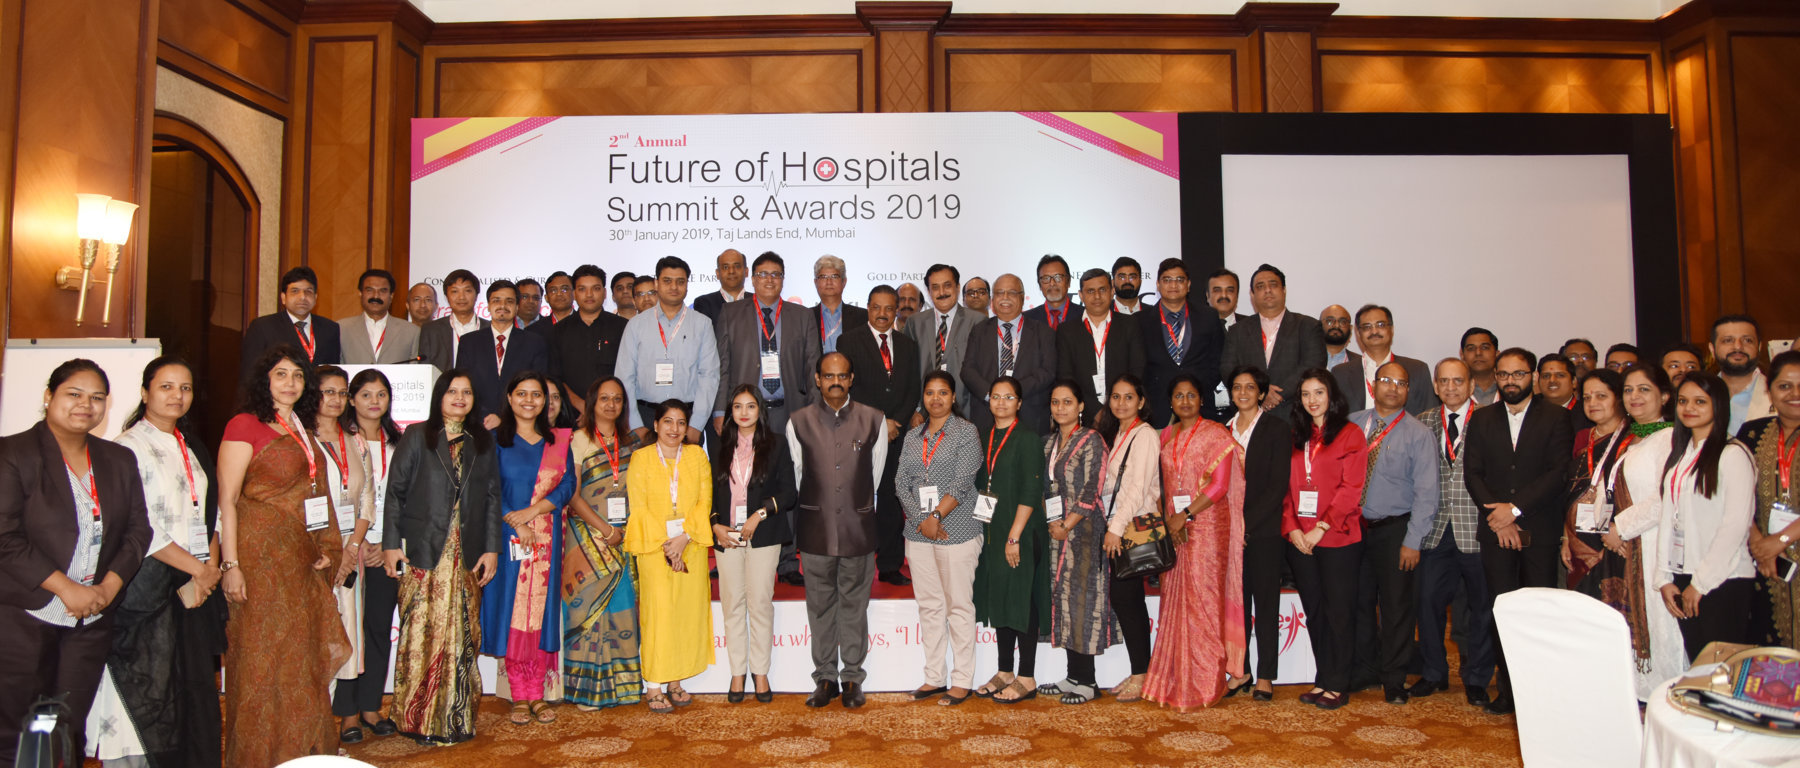 2nd Annual Future of Hospitals Summit & Awards 2019